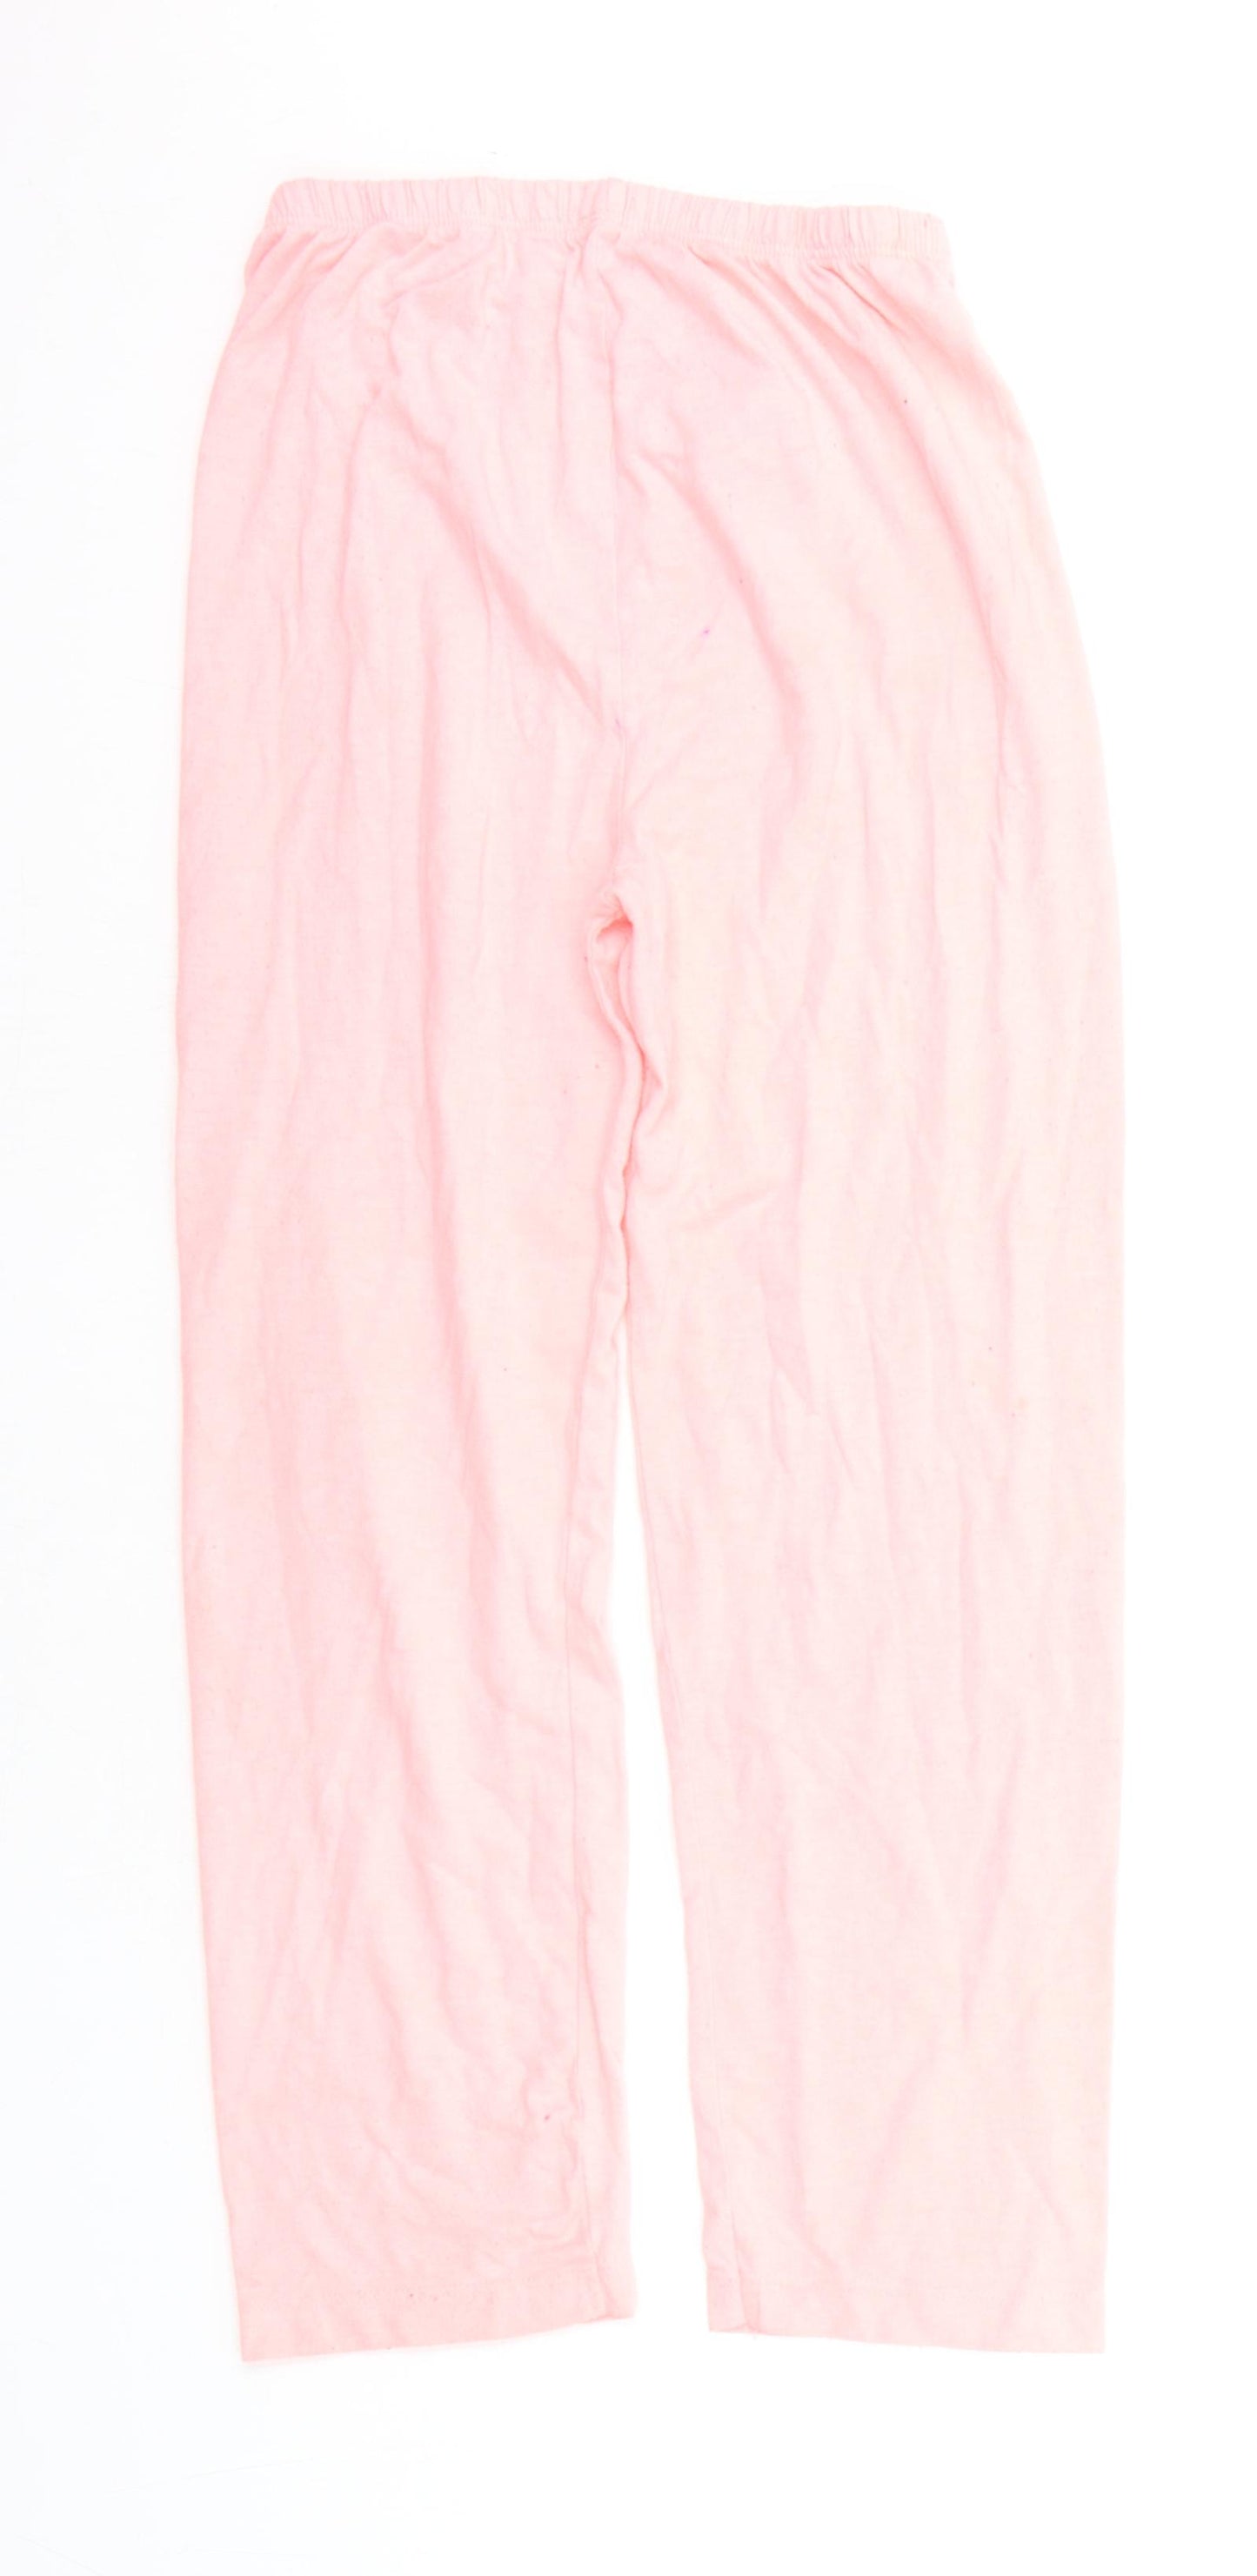 Primark Girls Pink Solid  Top Lounge Pants Size 7-8 Years